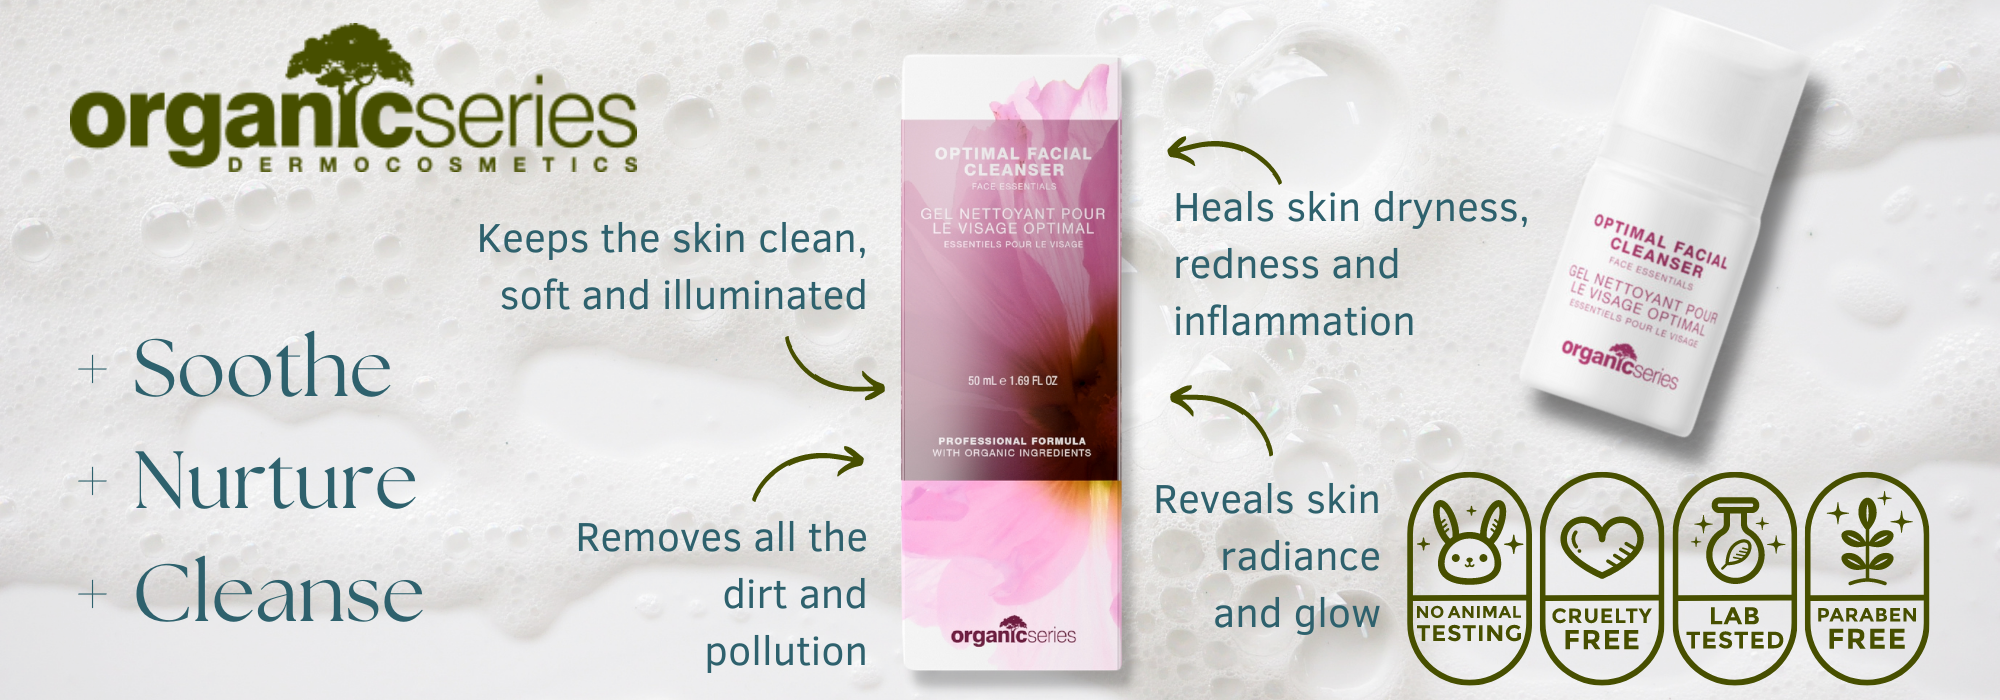 optimal facial cleanser by organic series